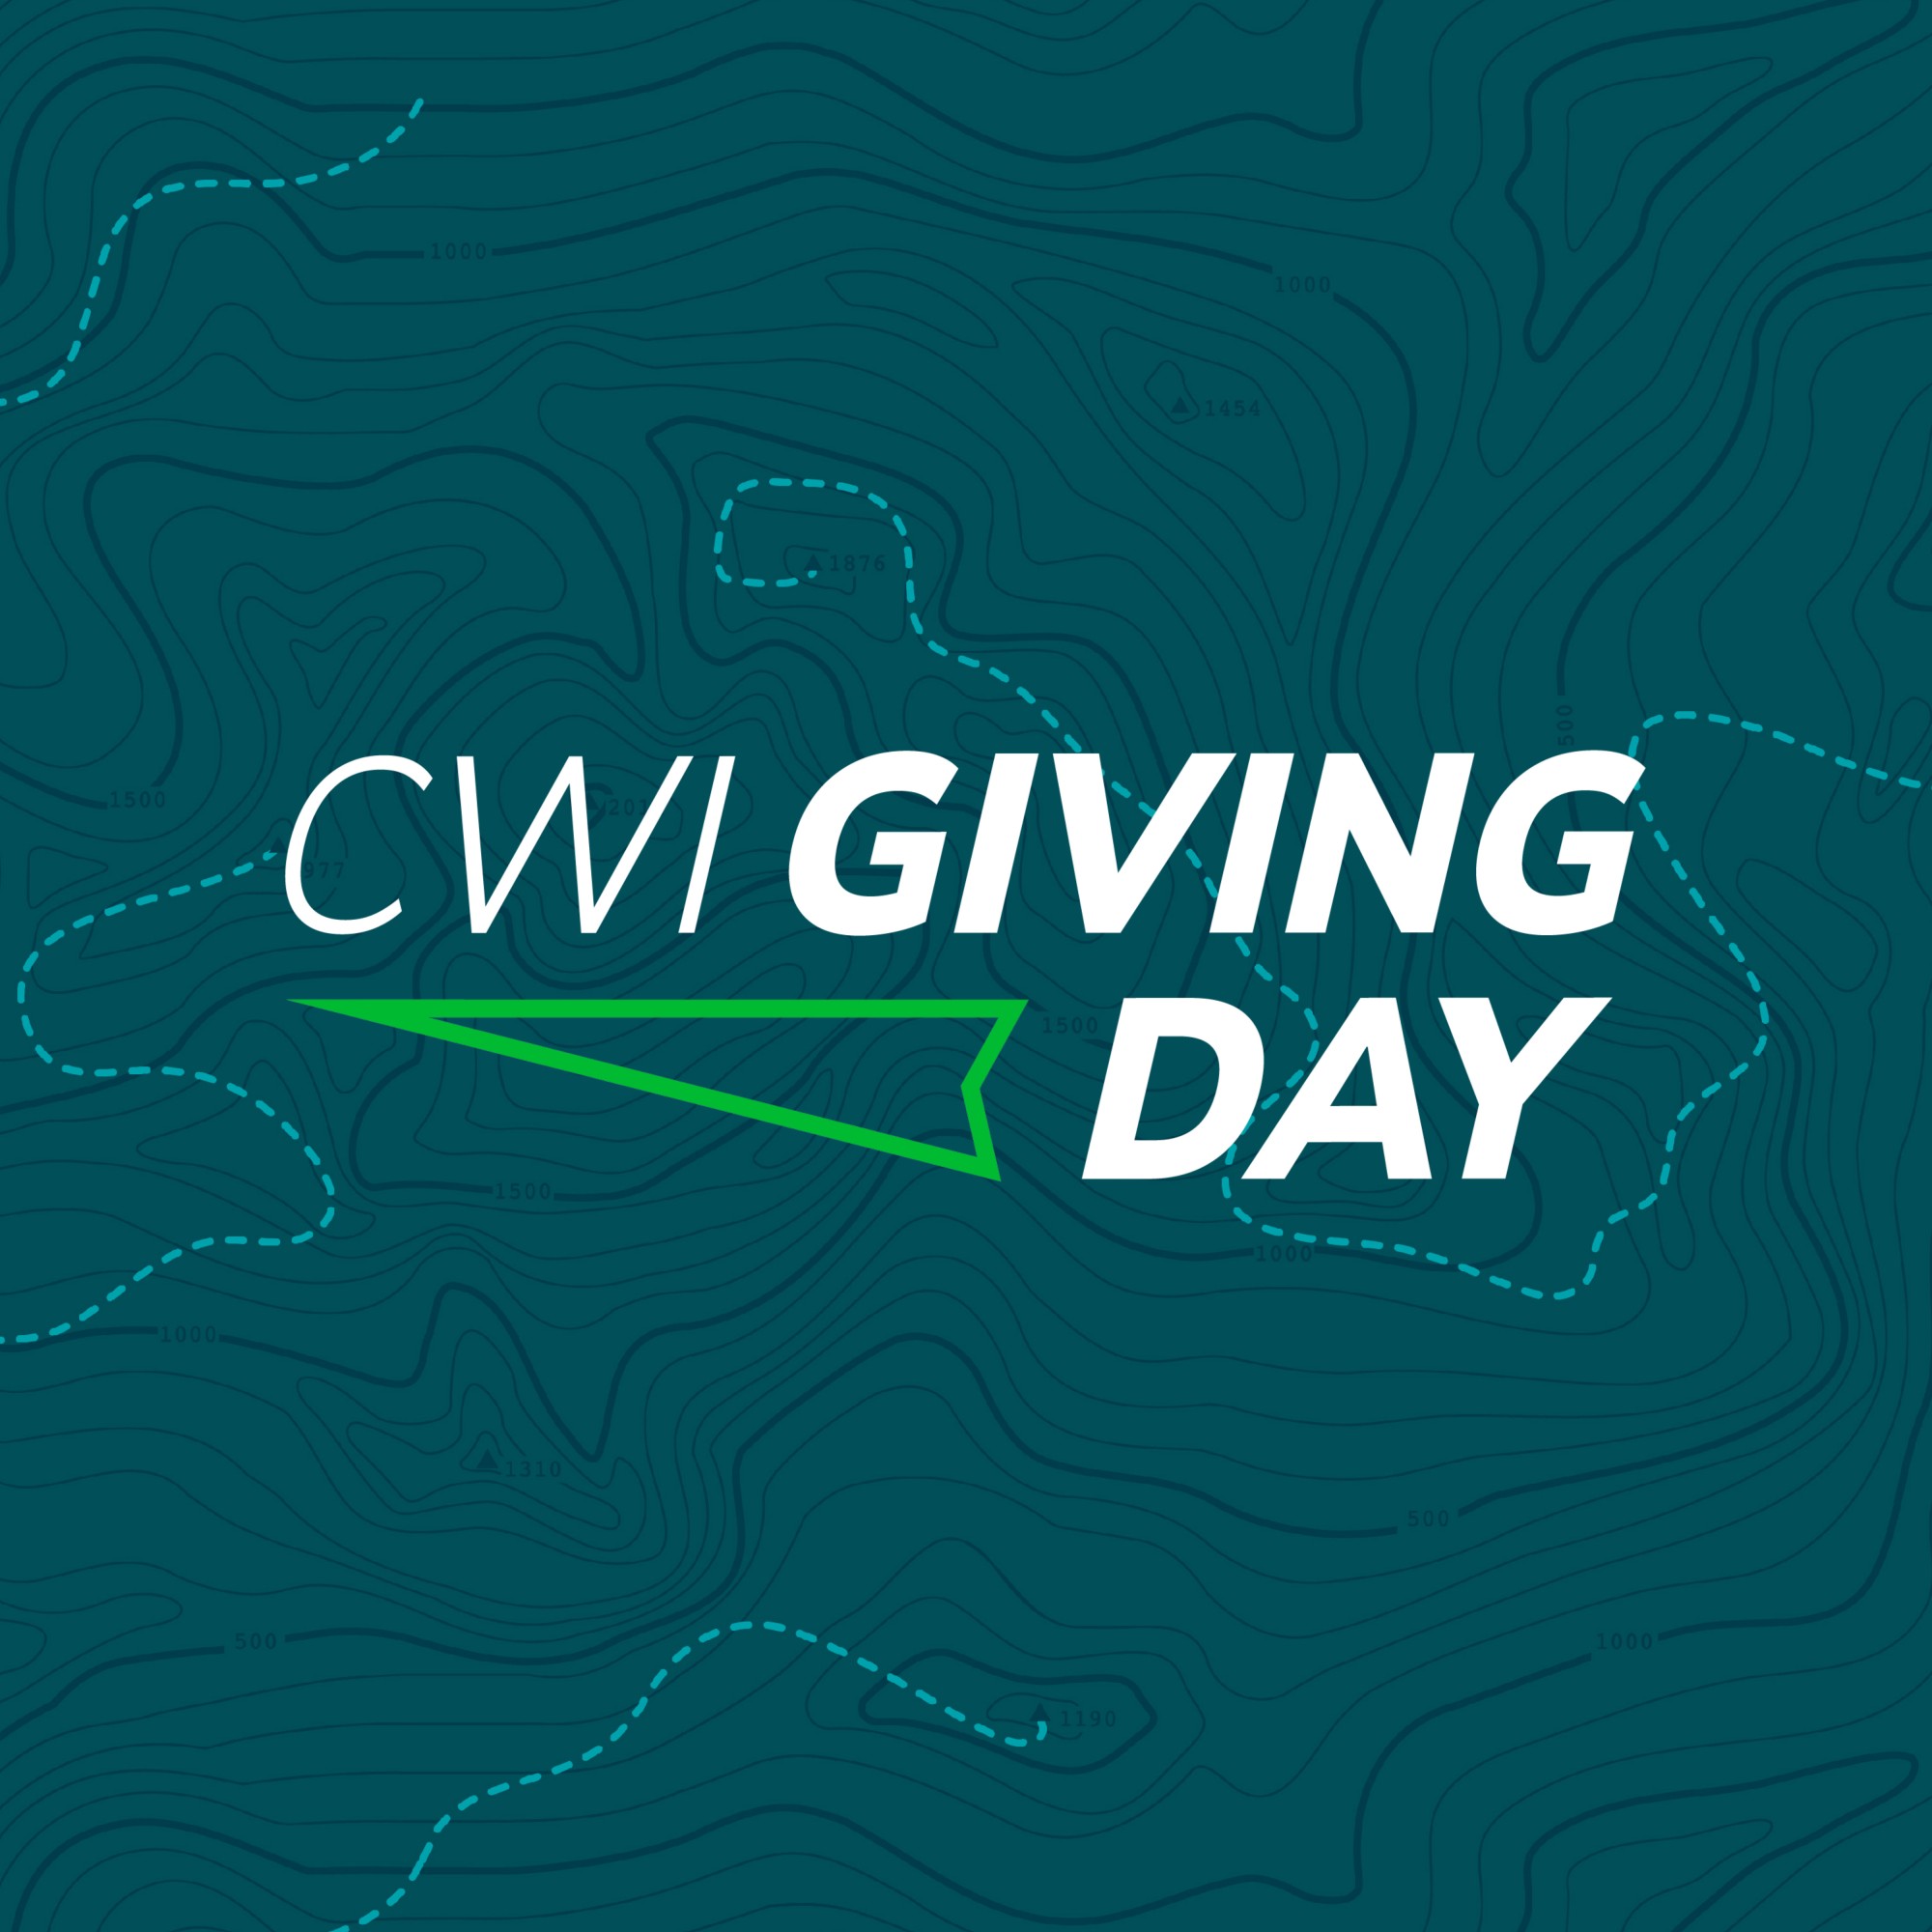 CWI Giving Day